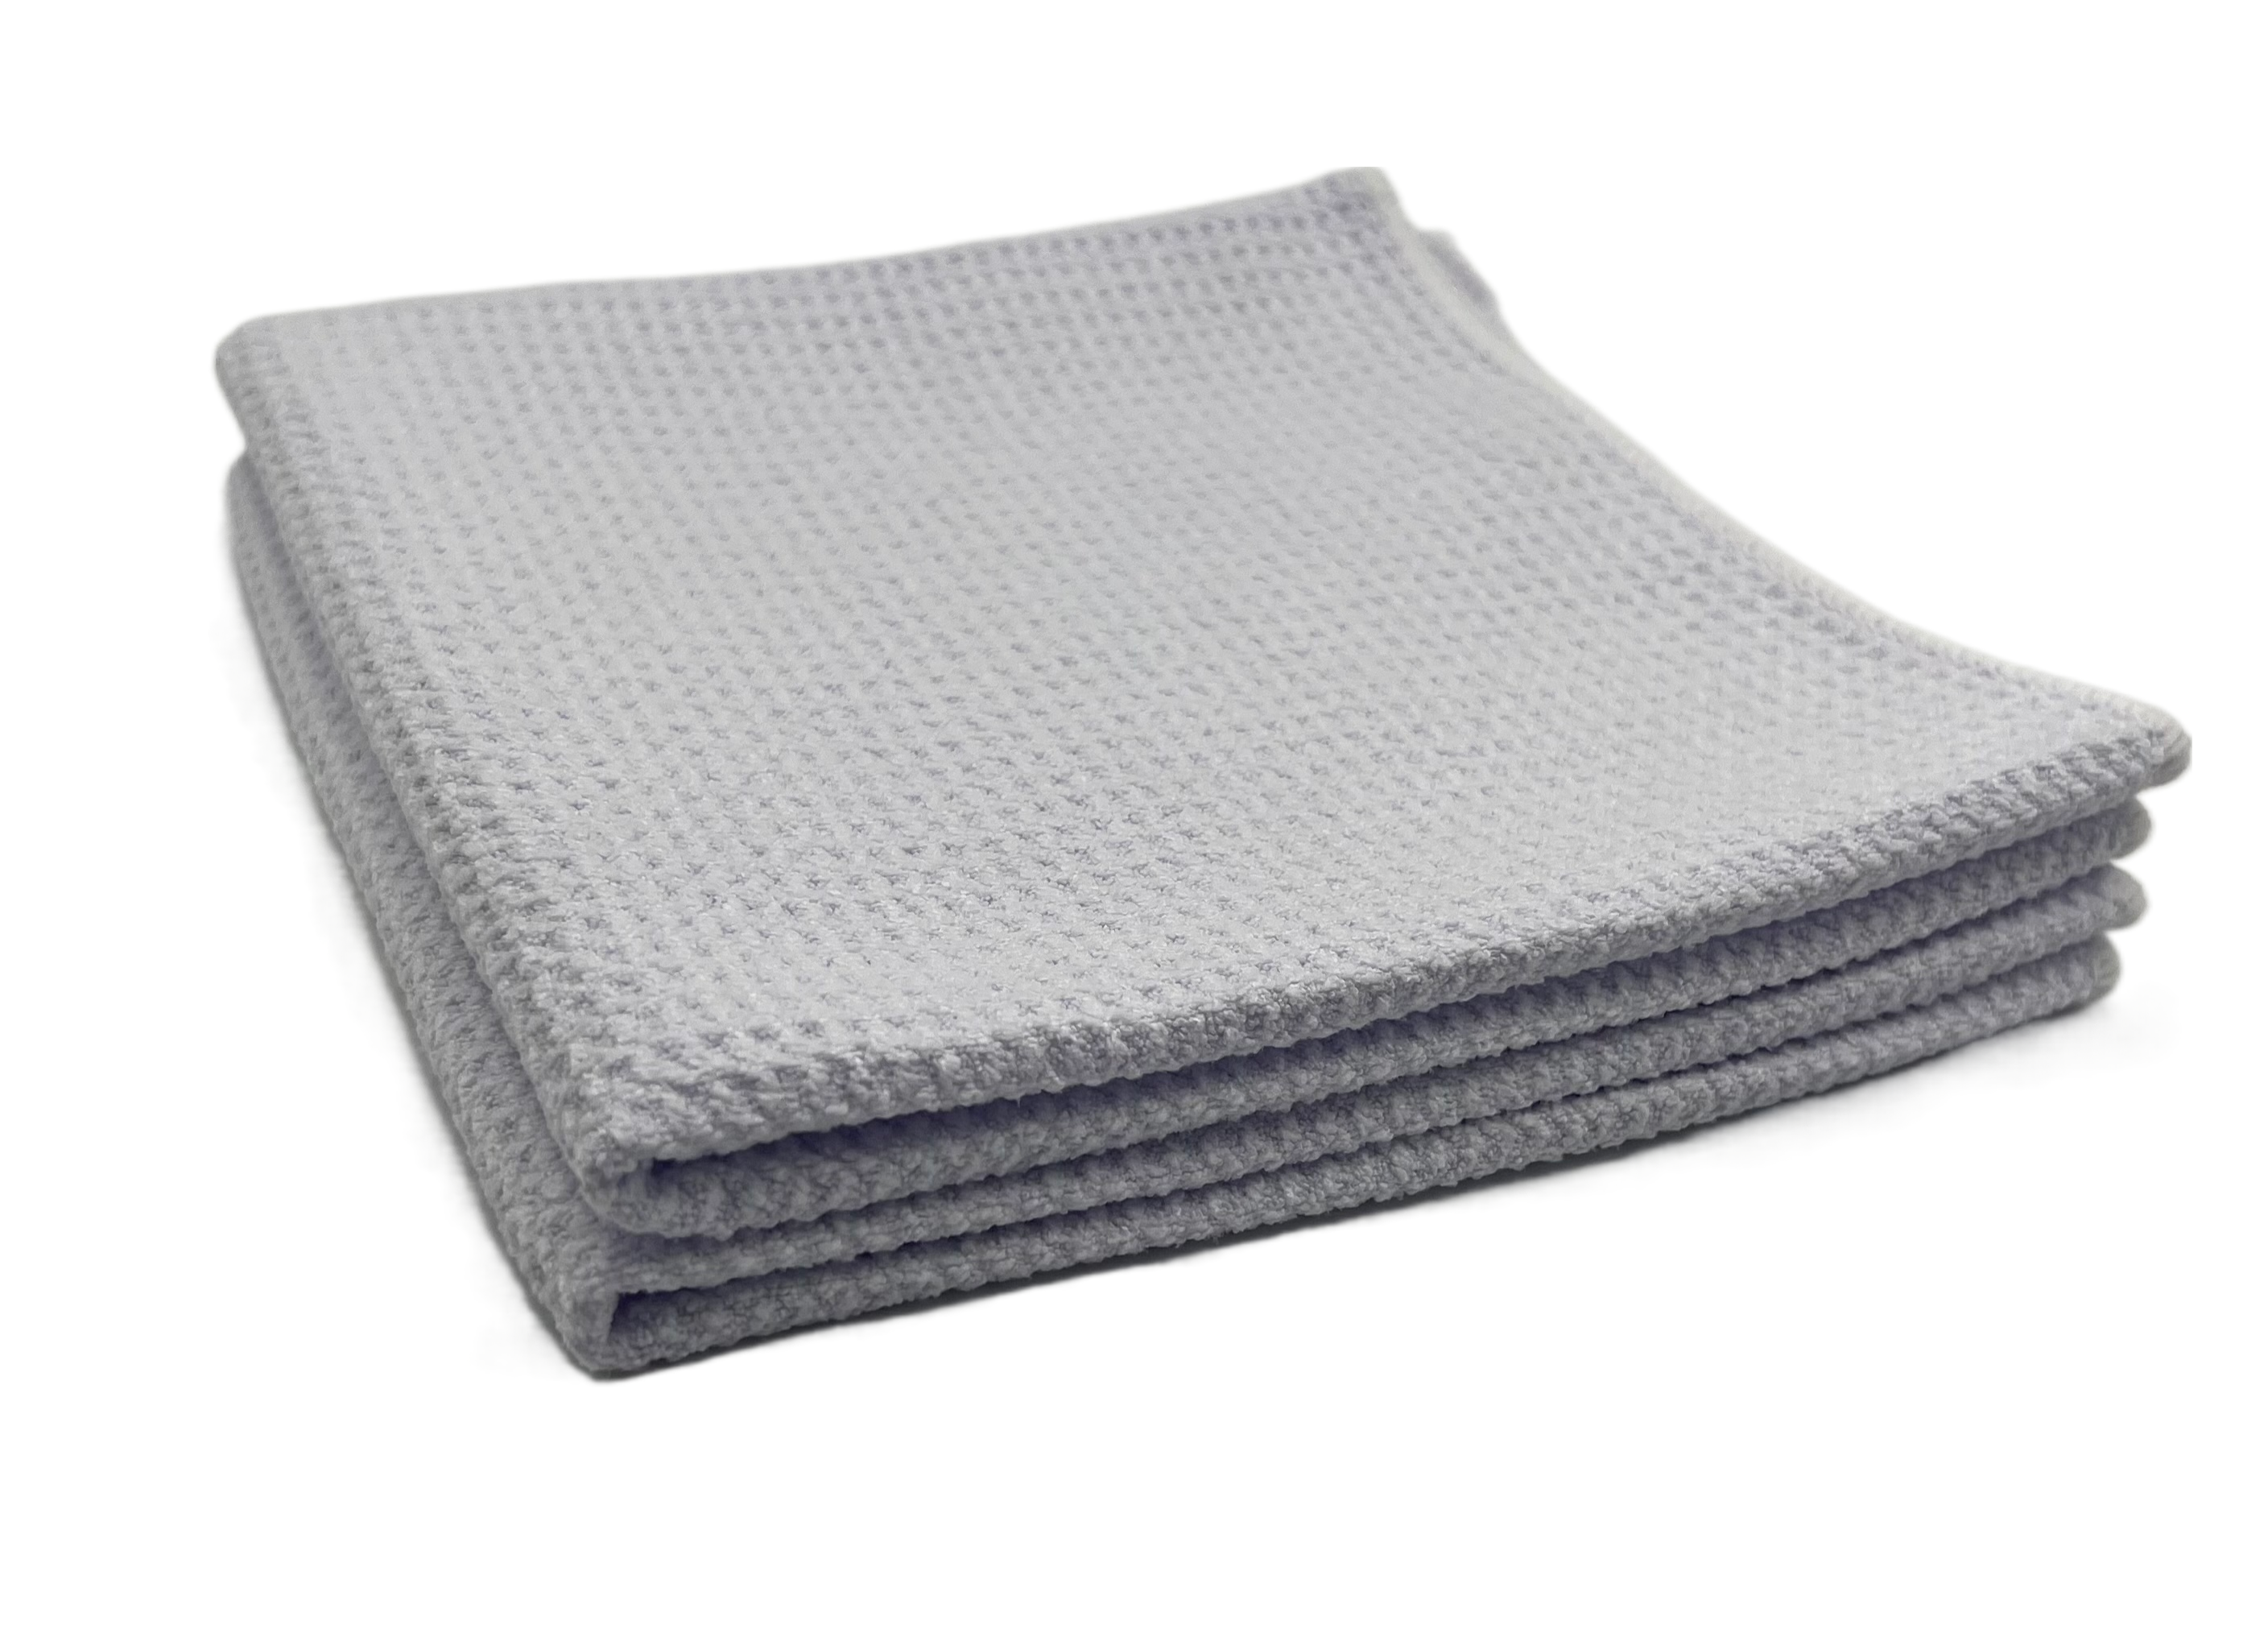 3X Waffle Weave Thirsty Microfiber Deluxe Drying Towel Auto Home Kitchen  16x24